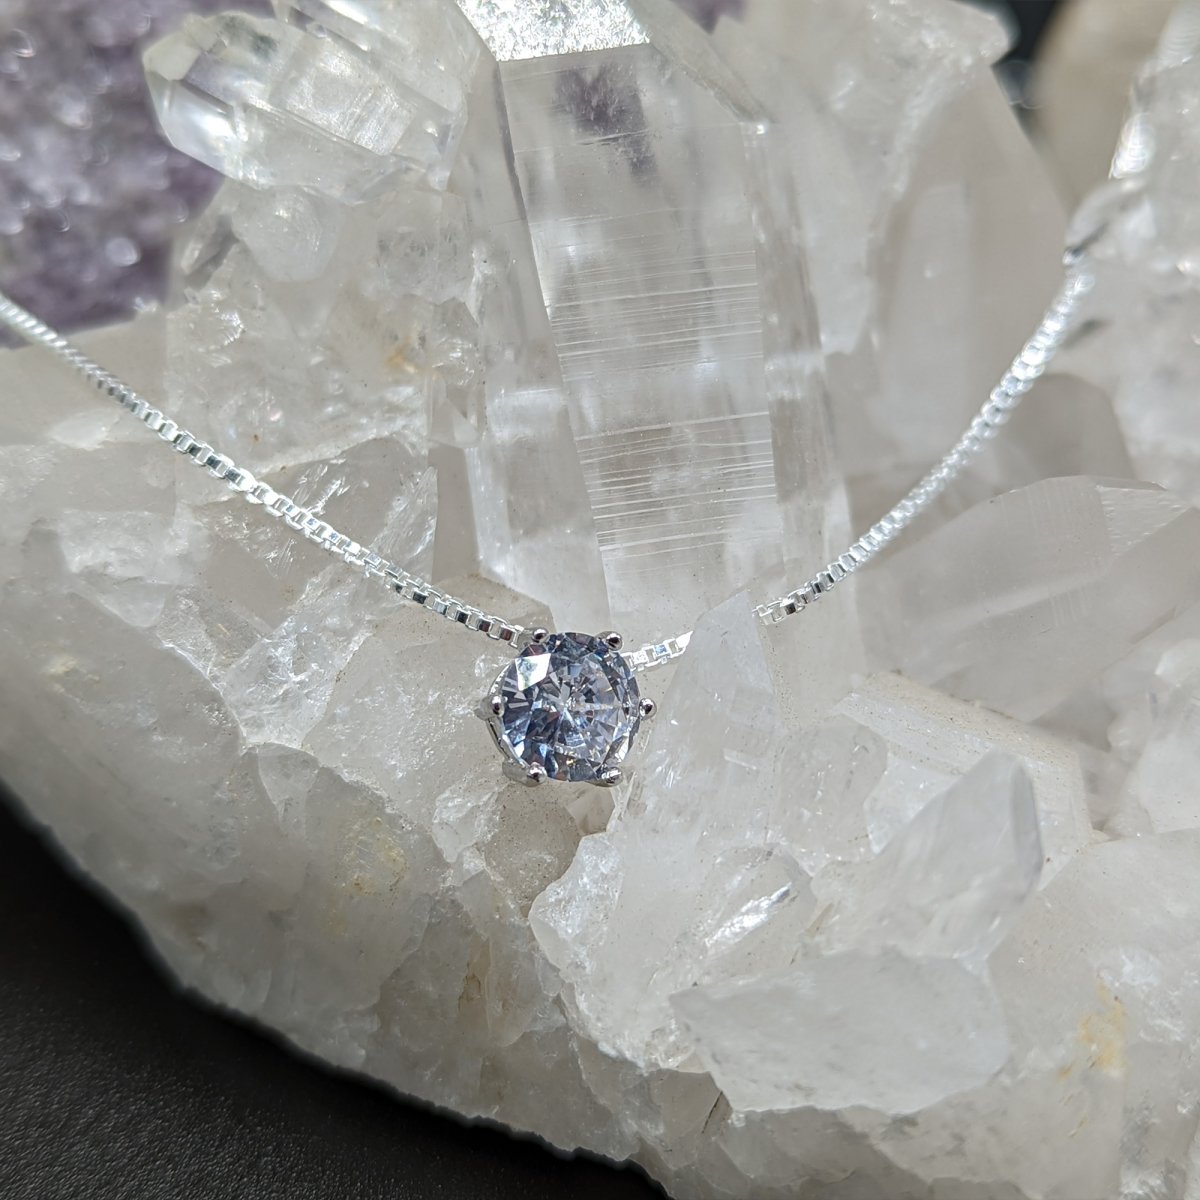 Niece Gift - Dainty CZ Sterling Silver Necklace - Meaningful Cards